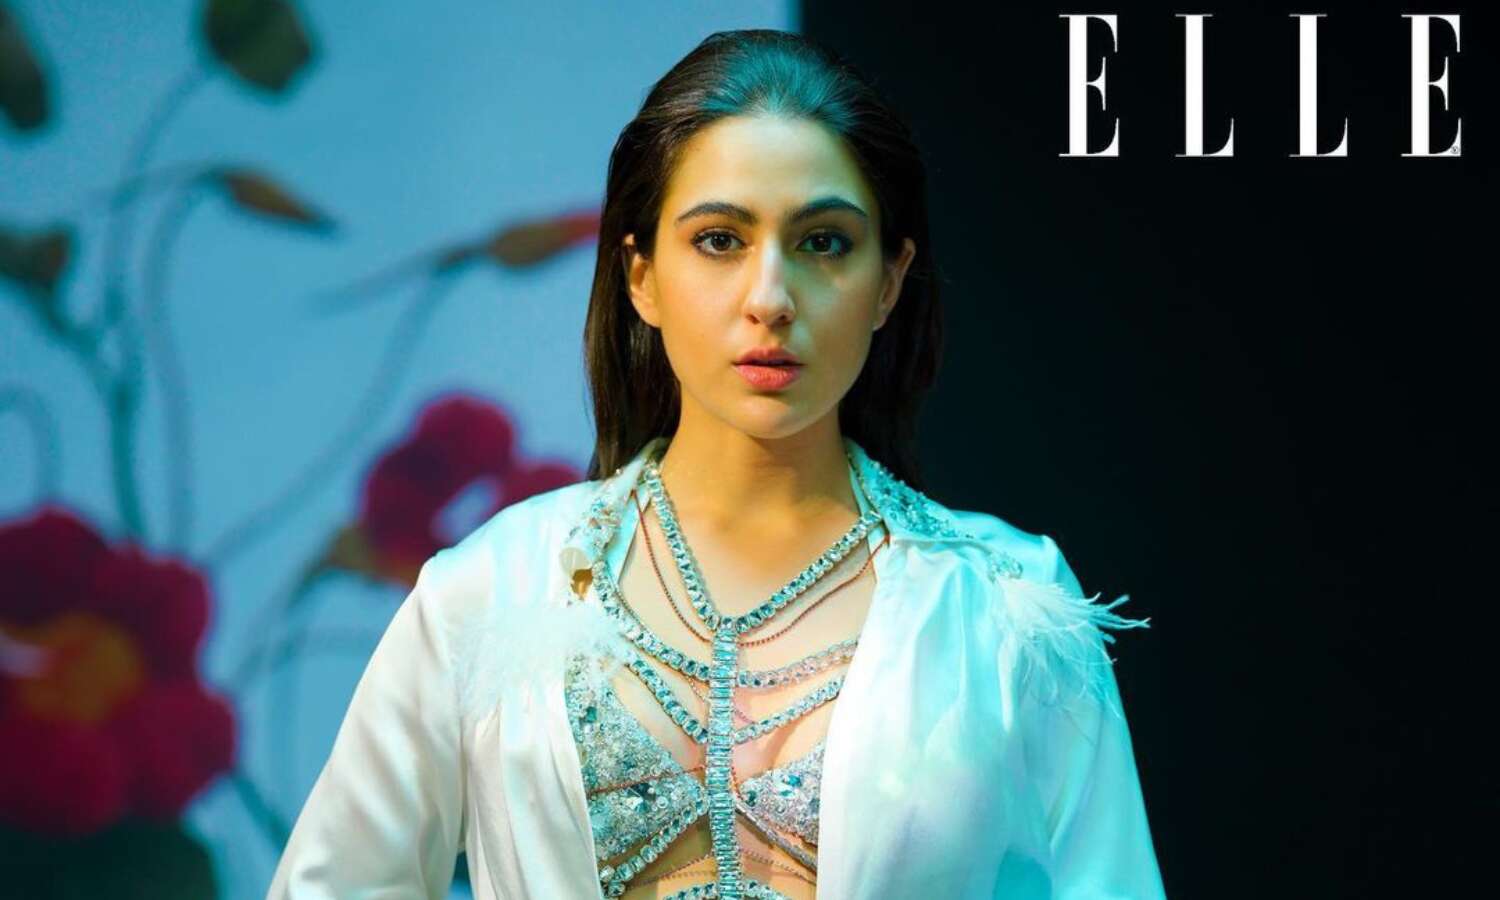 Sara Ali Khan Video: Sara Ali Khan’s new video is being watched a lot, let’s know why Sara has a suitcase in her hand